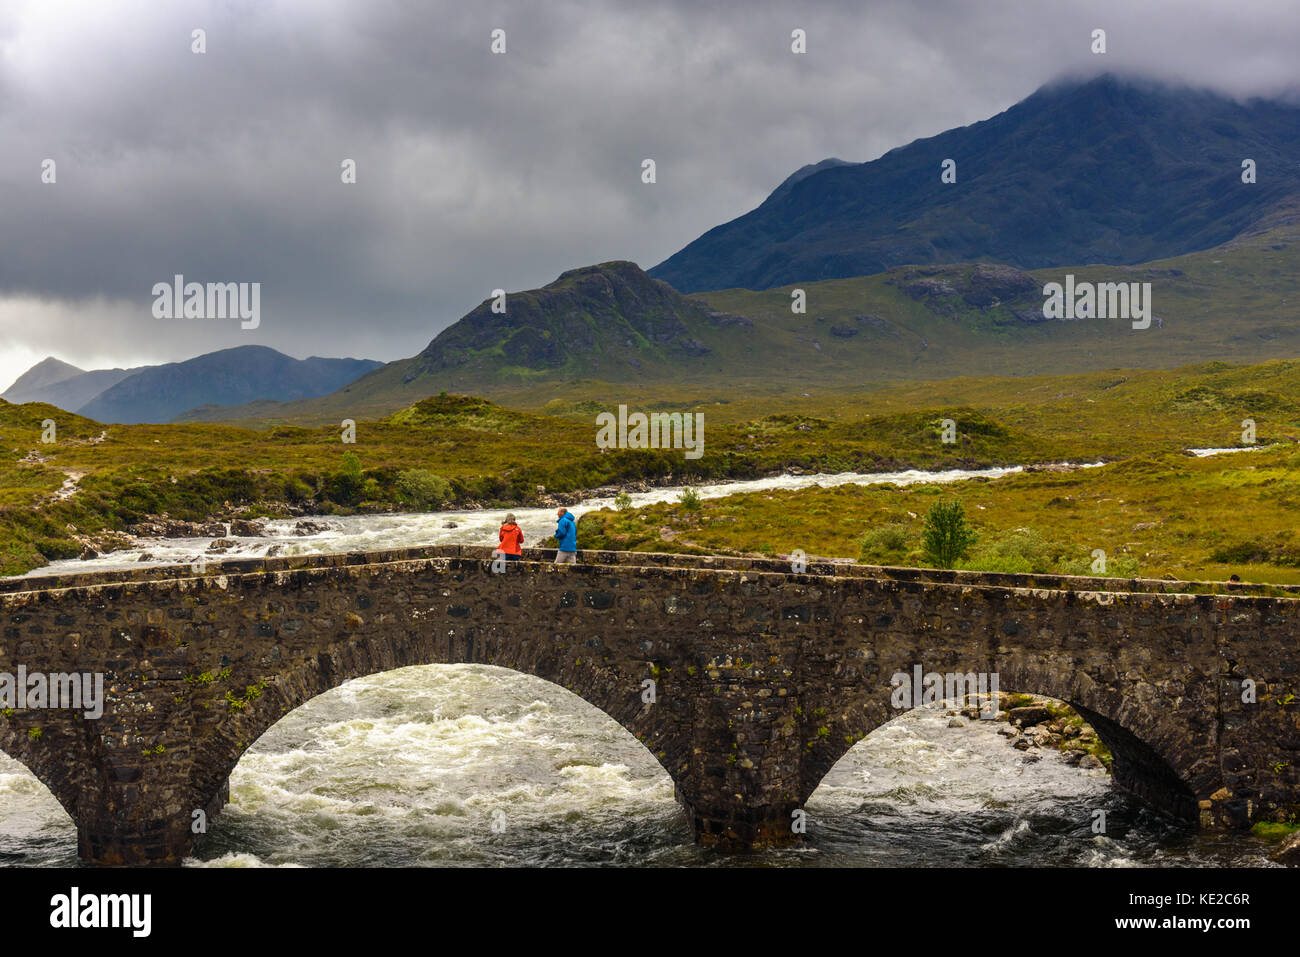 ISLE OF SKYE, SCOTLAND - AUGUST 11, 2017 - View of Sligachan bridge with Cuillins Hills on Isle of Skye with two tourists who look the panorama. Stock Photo